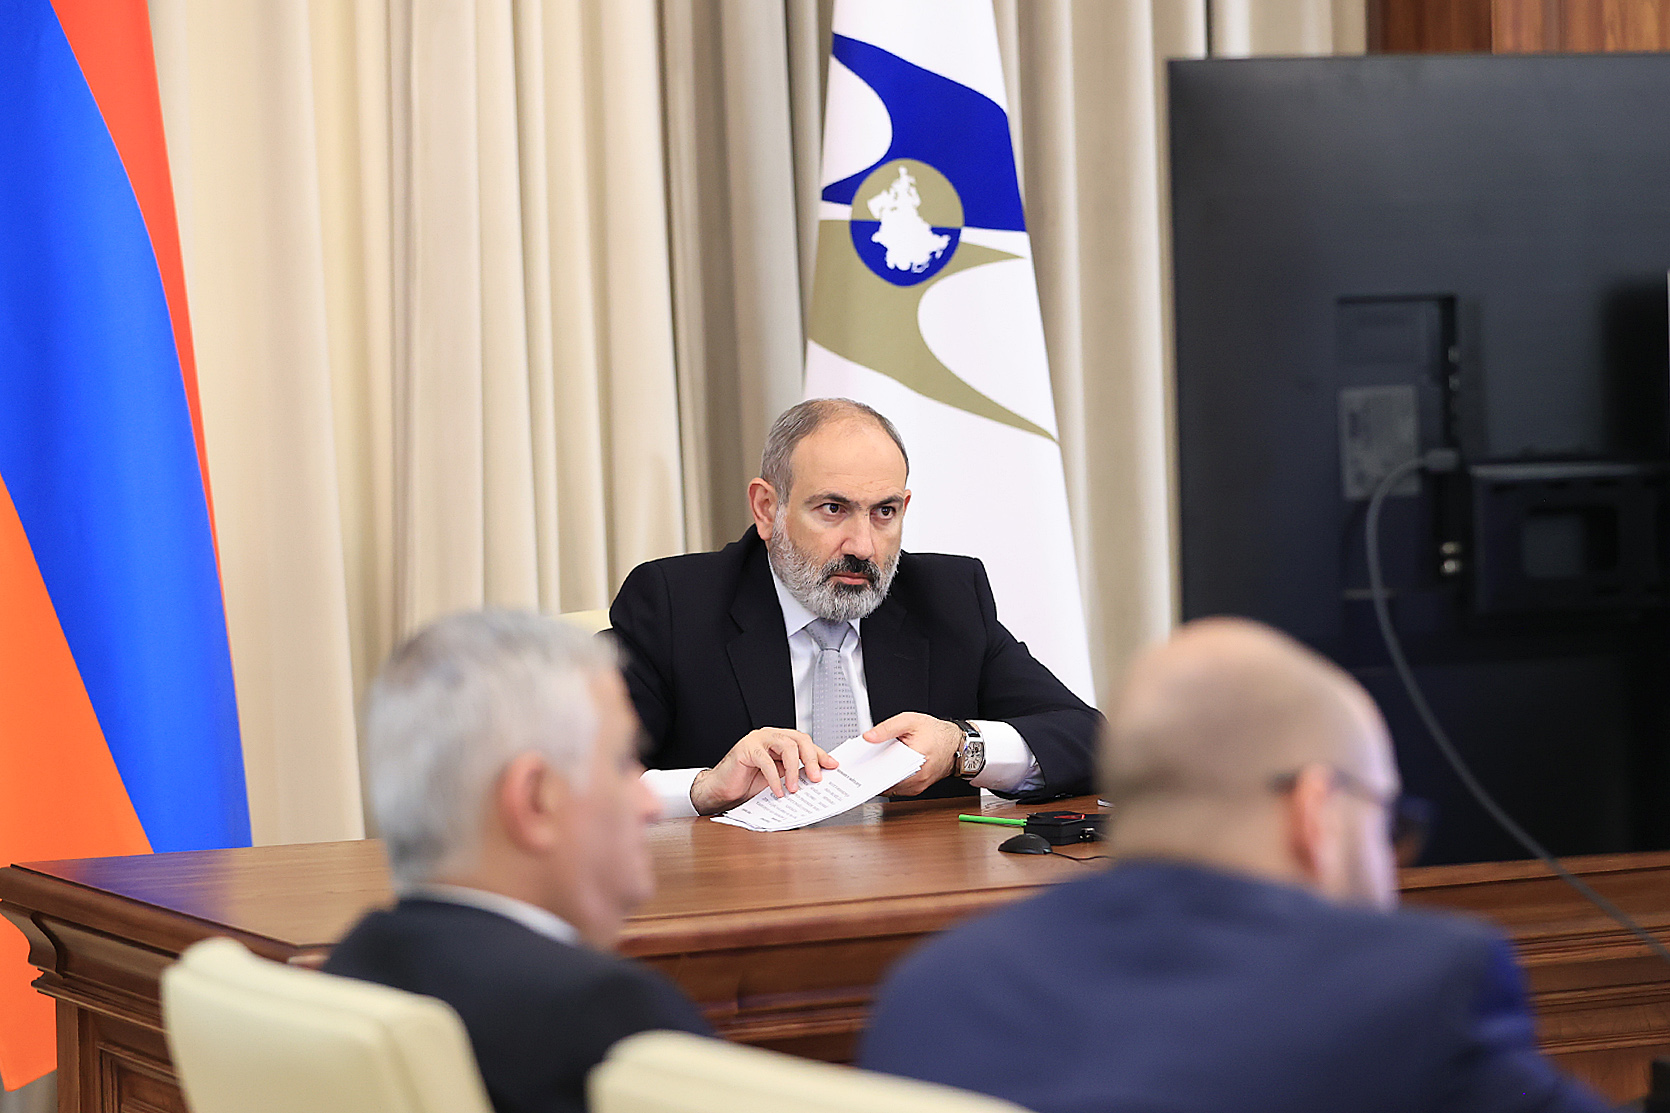 EEU countries should operatively adapt to the rapidly changing external and internal conditions. Nikol Pashinyan